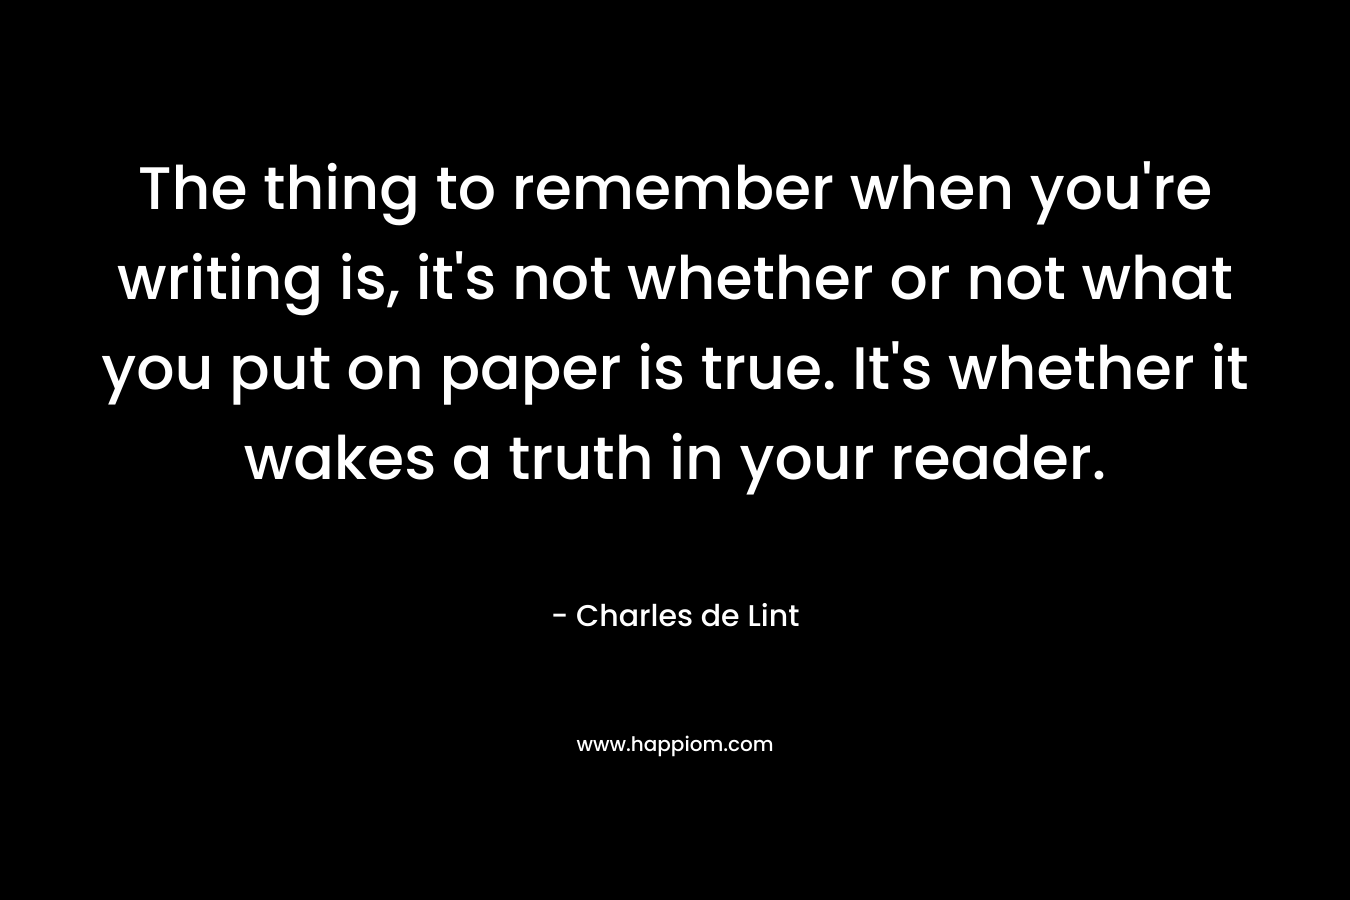 The thing to remember when you’re writing is, it’s not whether or not what you put on paper is true. It’s whether it wakes a truth in your reader. – Charles de Lint